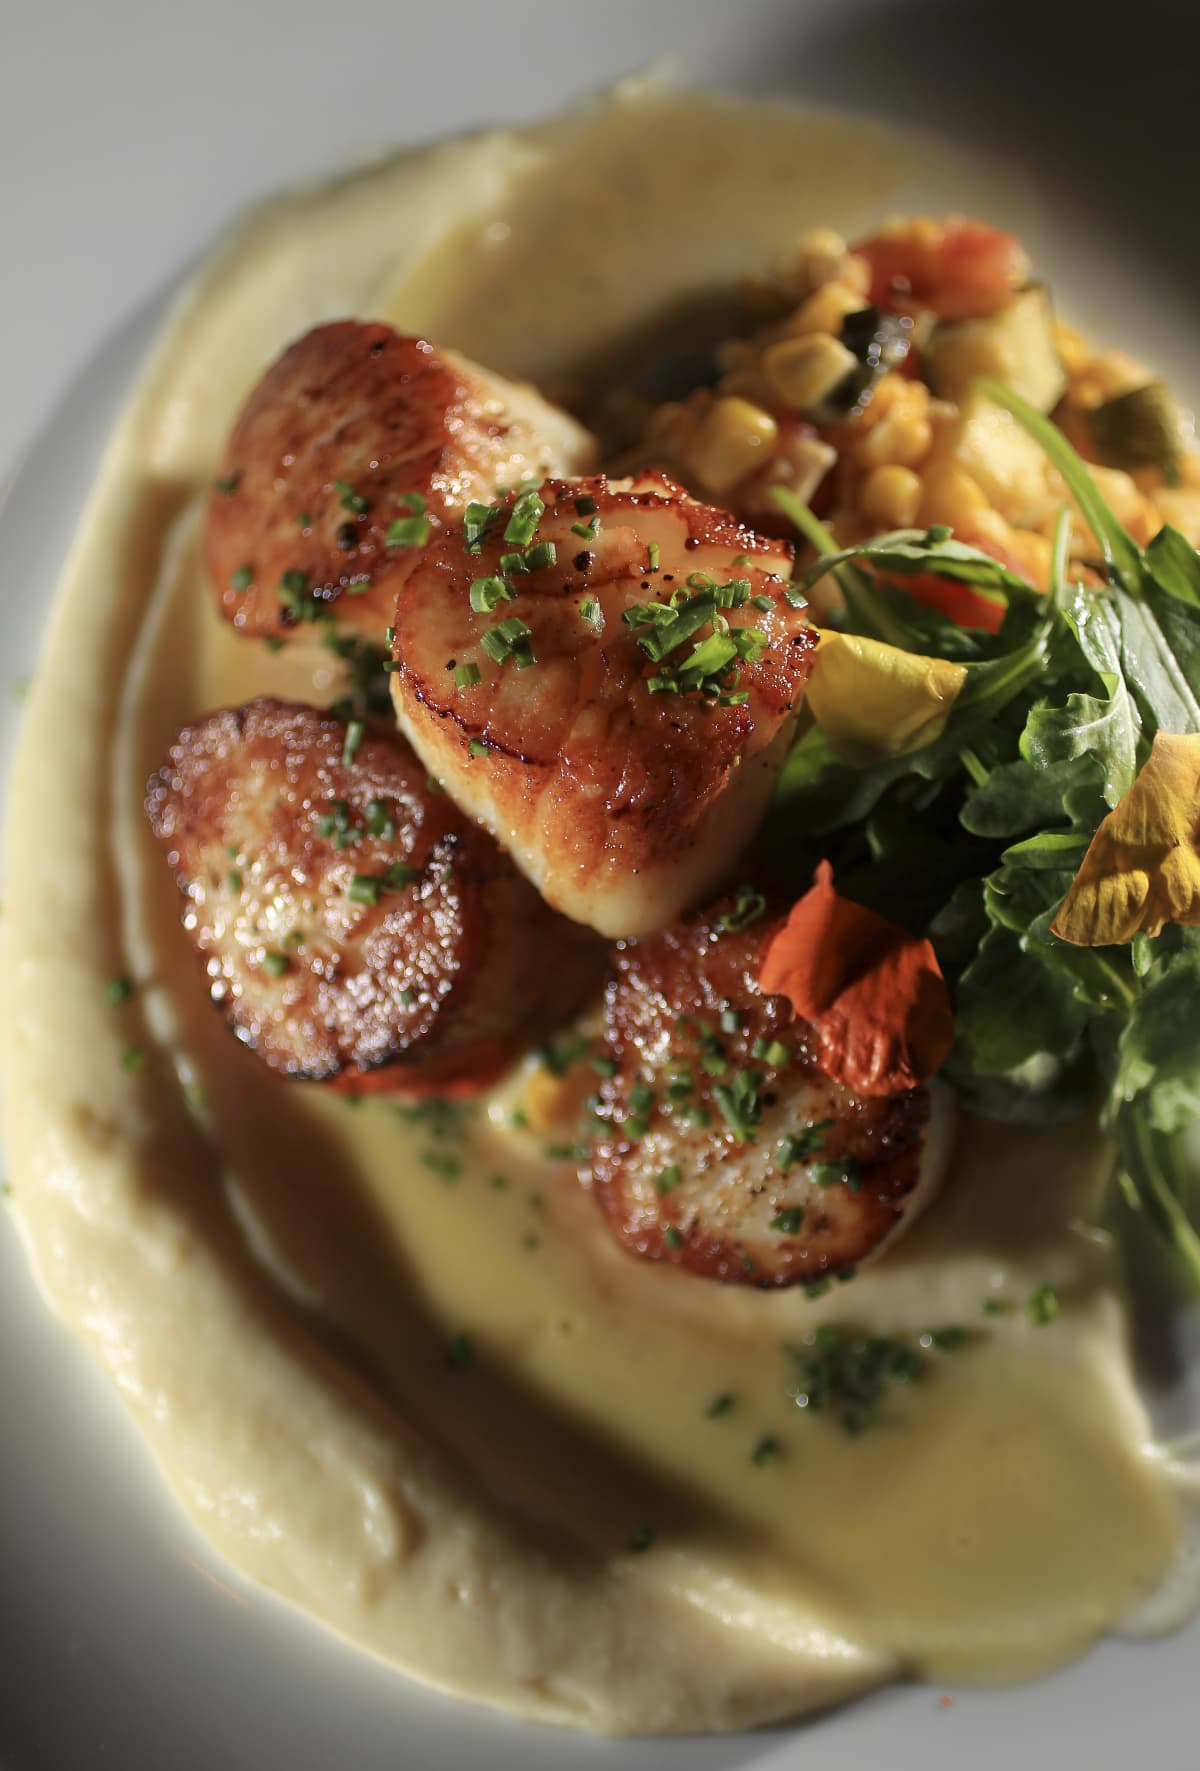 MEDFIELD, MA - JULY 2: Pan-seared scallops: parsnip puree, summer vegetables succotash, and corn veloute from Zebra's in Medfield, photographed on July 2, 2013. (Photo by Essdras M Suarez/The Boston Globe via Getty Images)